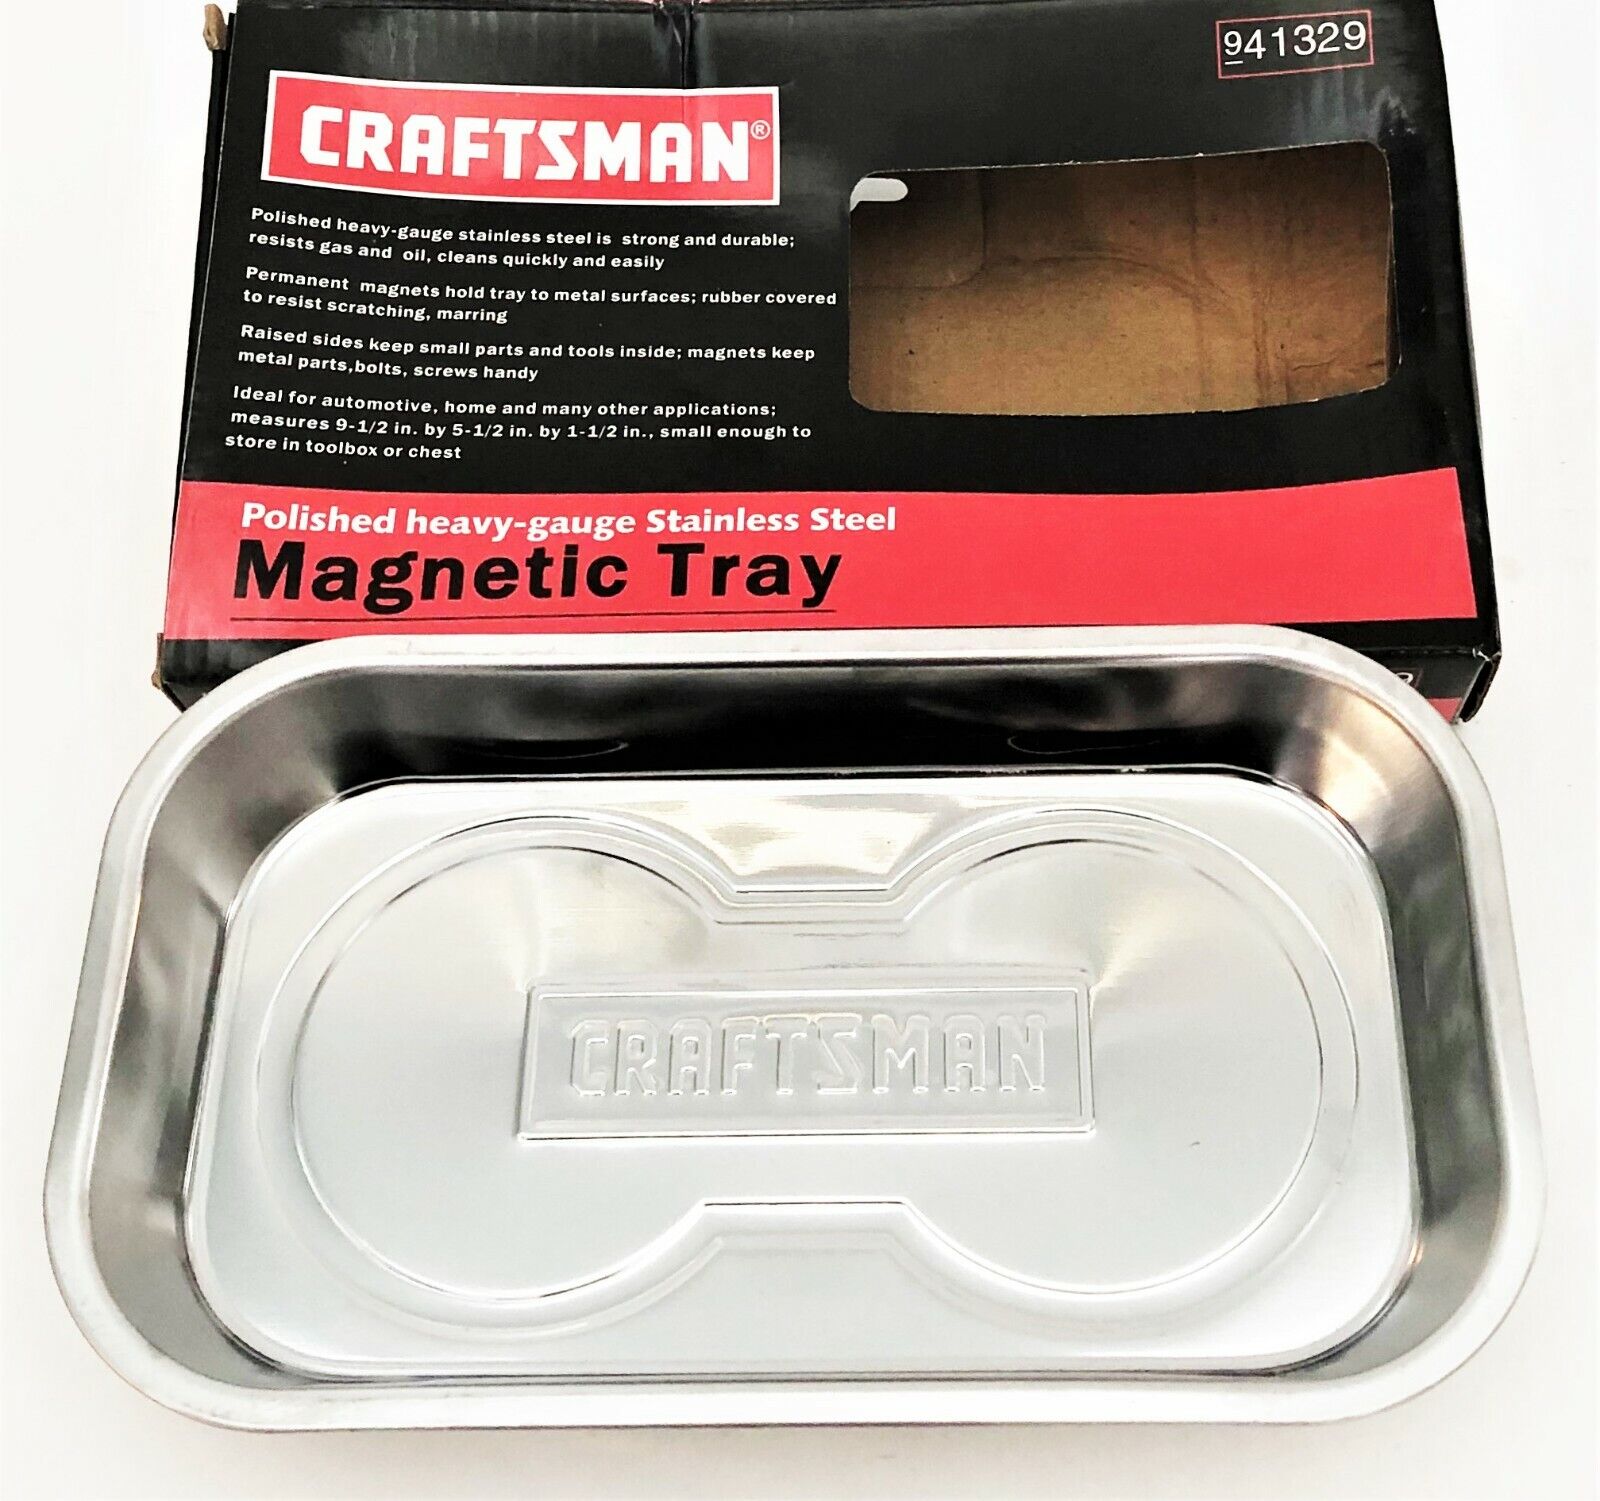 CRAFTSMAN 6" X 10" RECTANGLE STAINLESS STEEL MAGNETIC PARTS TRAY DISH 941329